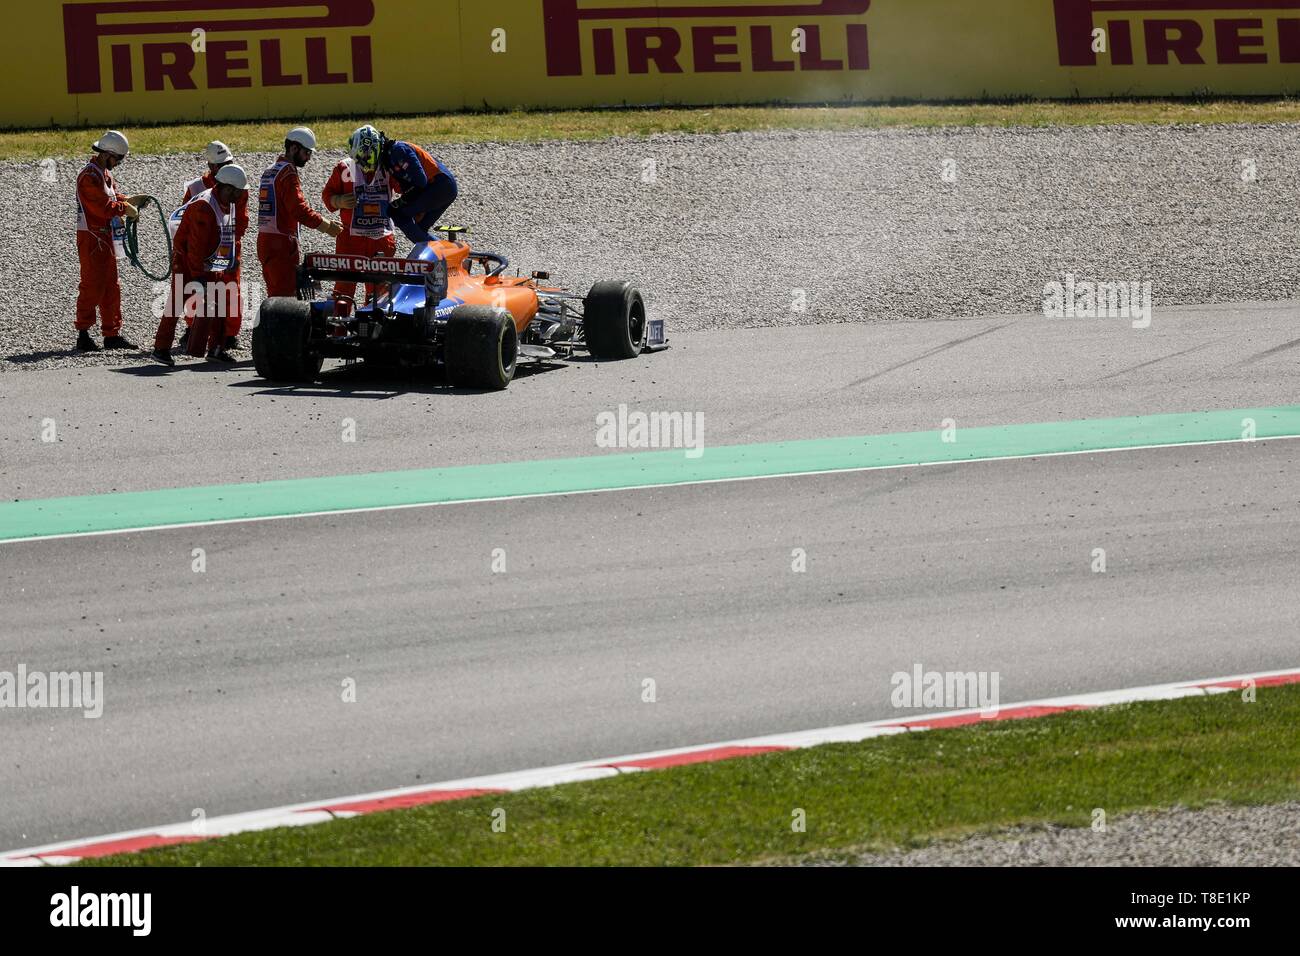 Barcelona, Spain. 12th May, 2019. LANDO NORRIS of McLaren F1 Team gets out  of the car after crashing during the Formula 1 Spanish Grand Prix at  Circuit de Barcelona-Catalunya in Barcelona, Spain.